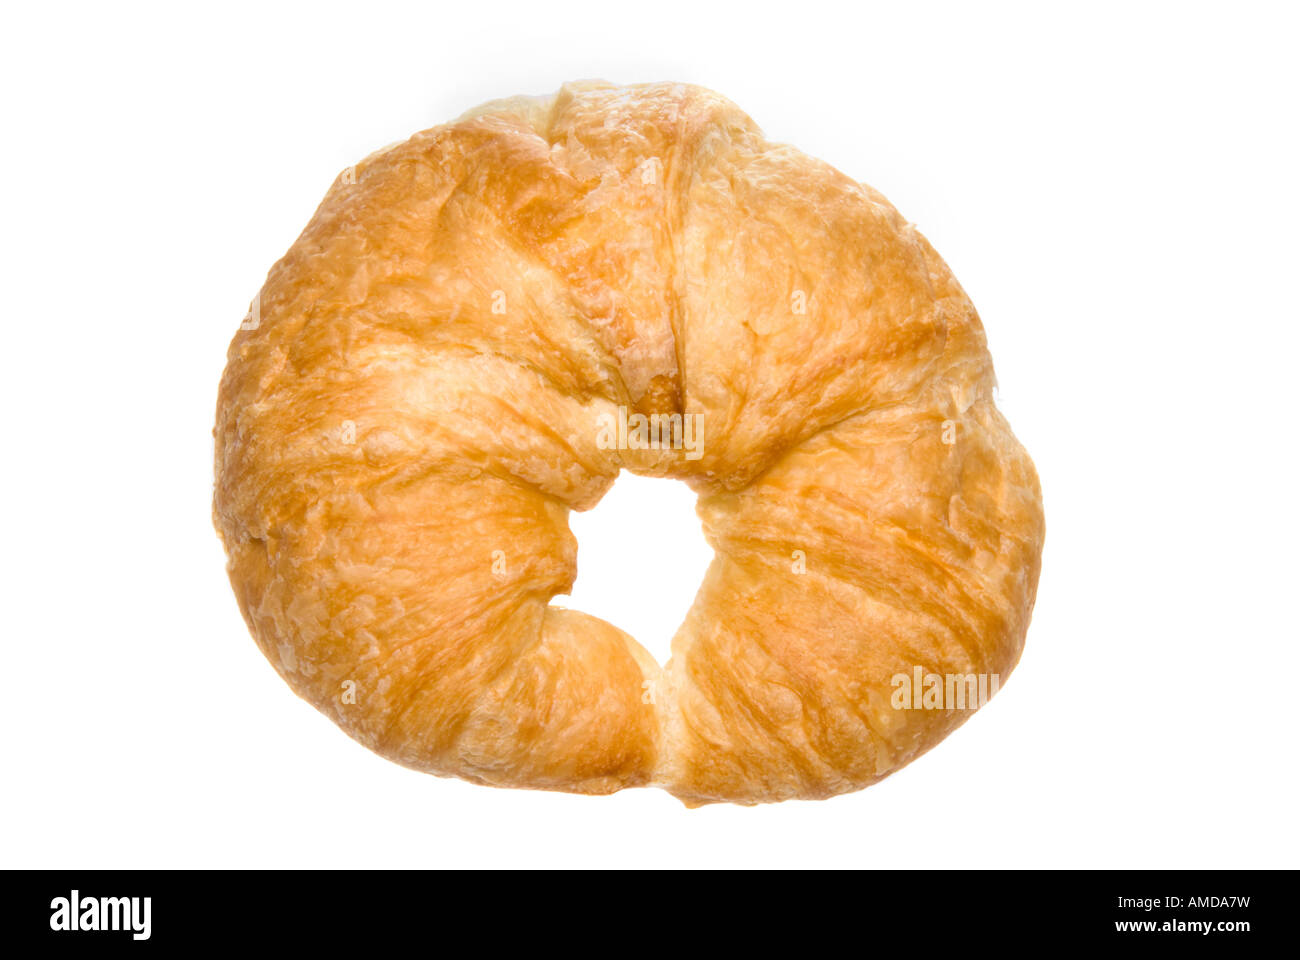 A scrumptious croissant fresh out of the bakery awaits its turn to be consumed Stock Photo